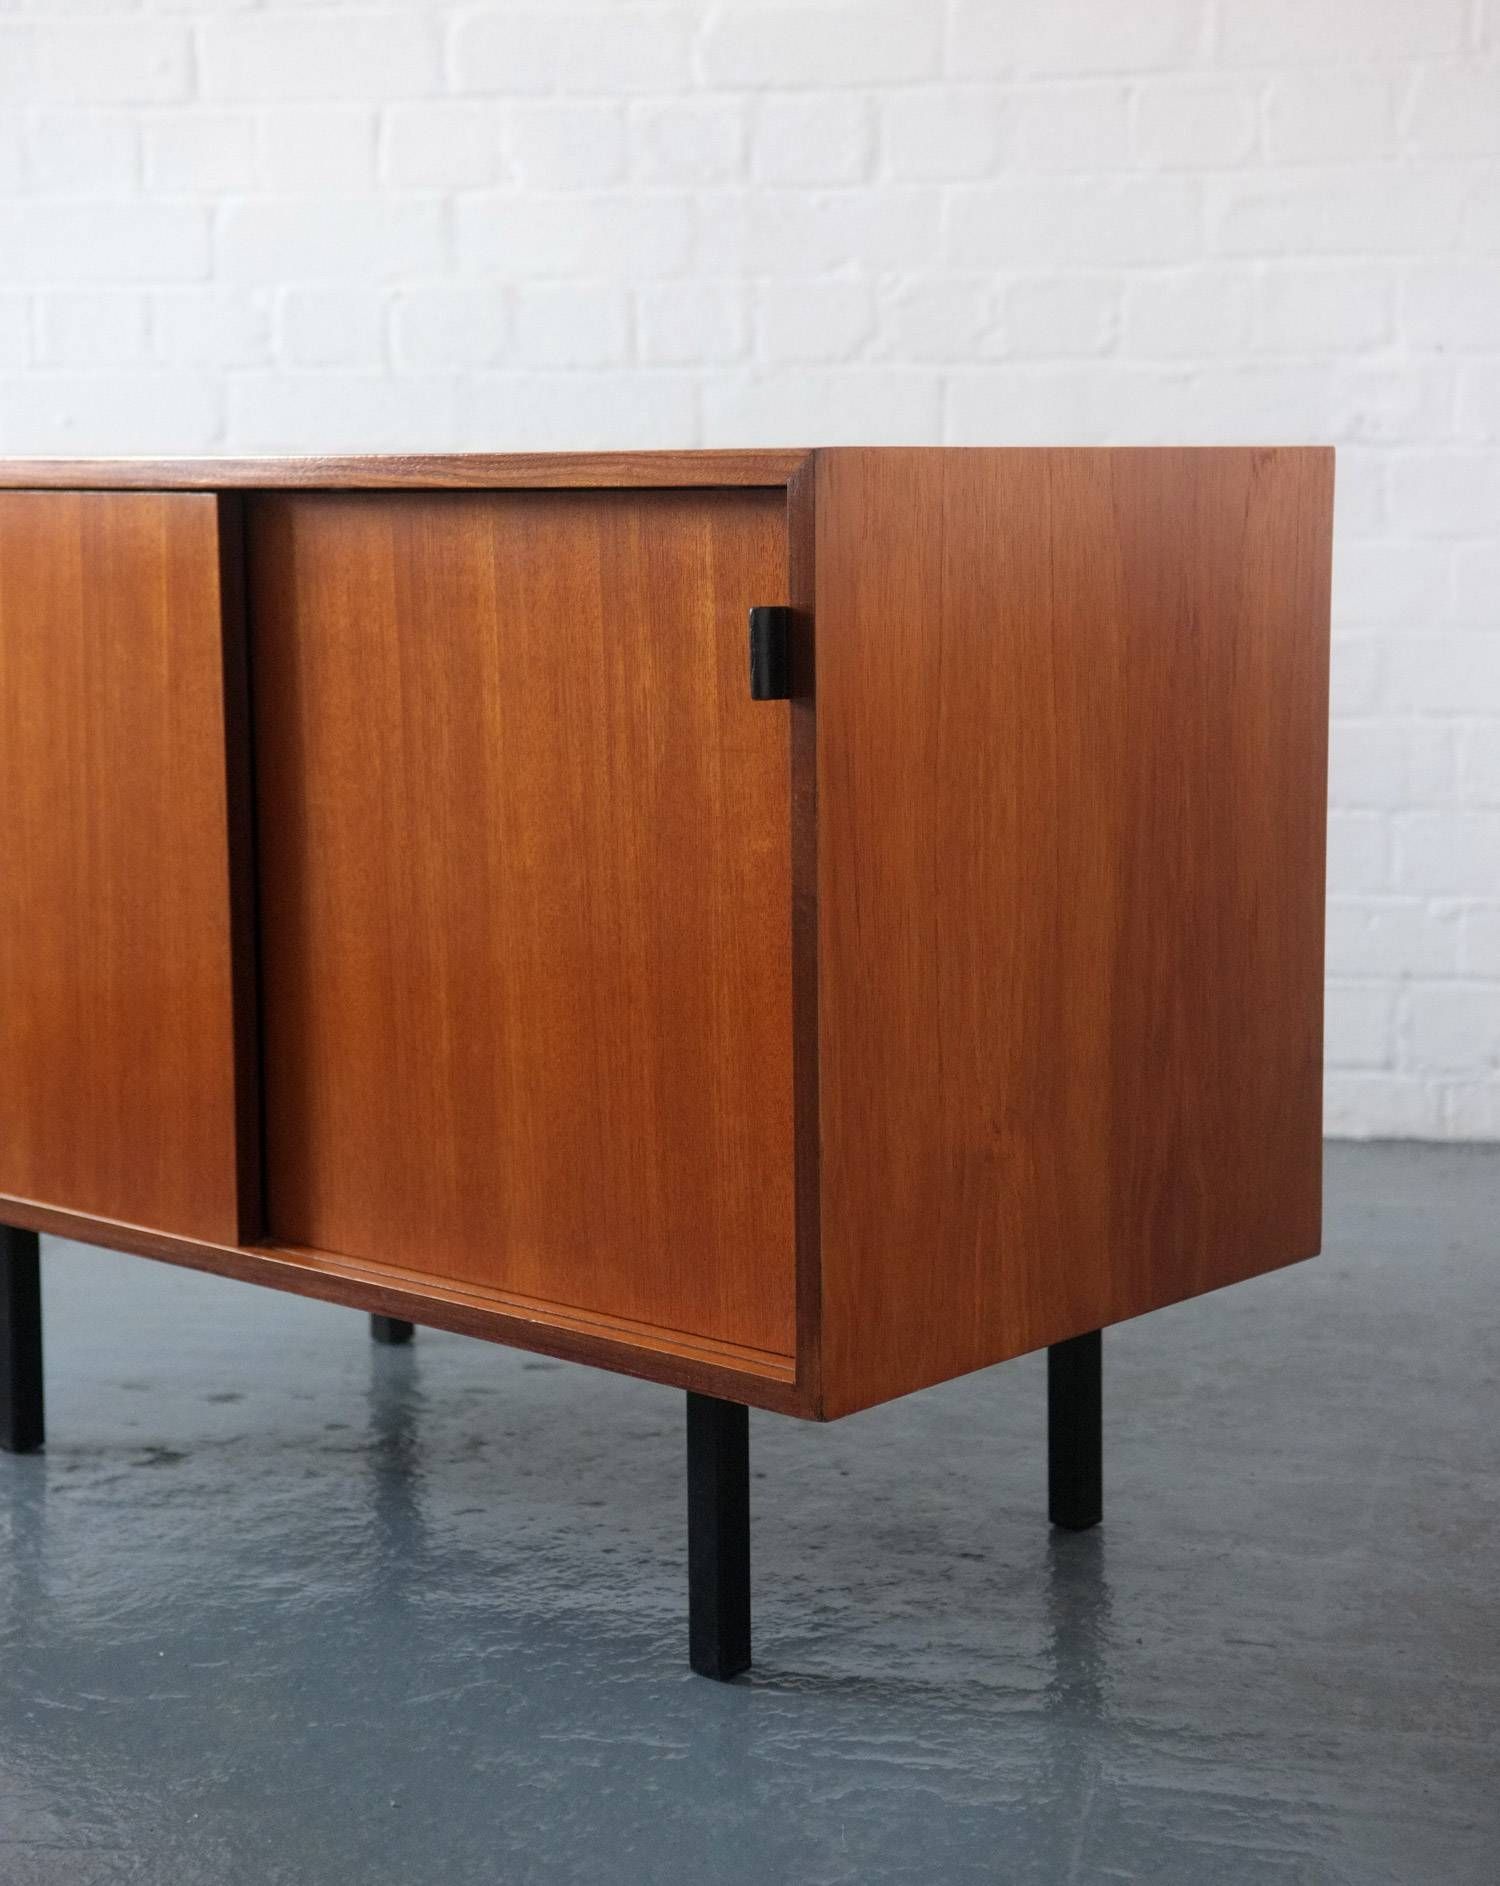 1950s Florence Knoll Sideboard | Modern Room – 20th Century Design Inside 2018 Florence Knoll Sideboards (View 5 of 15)